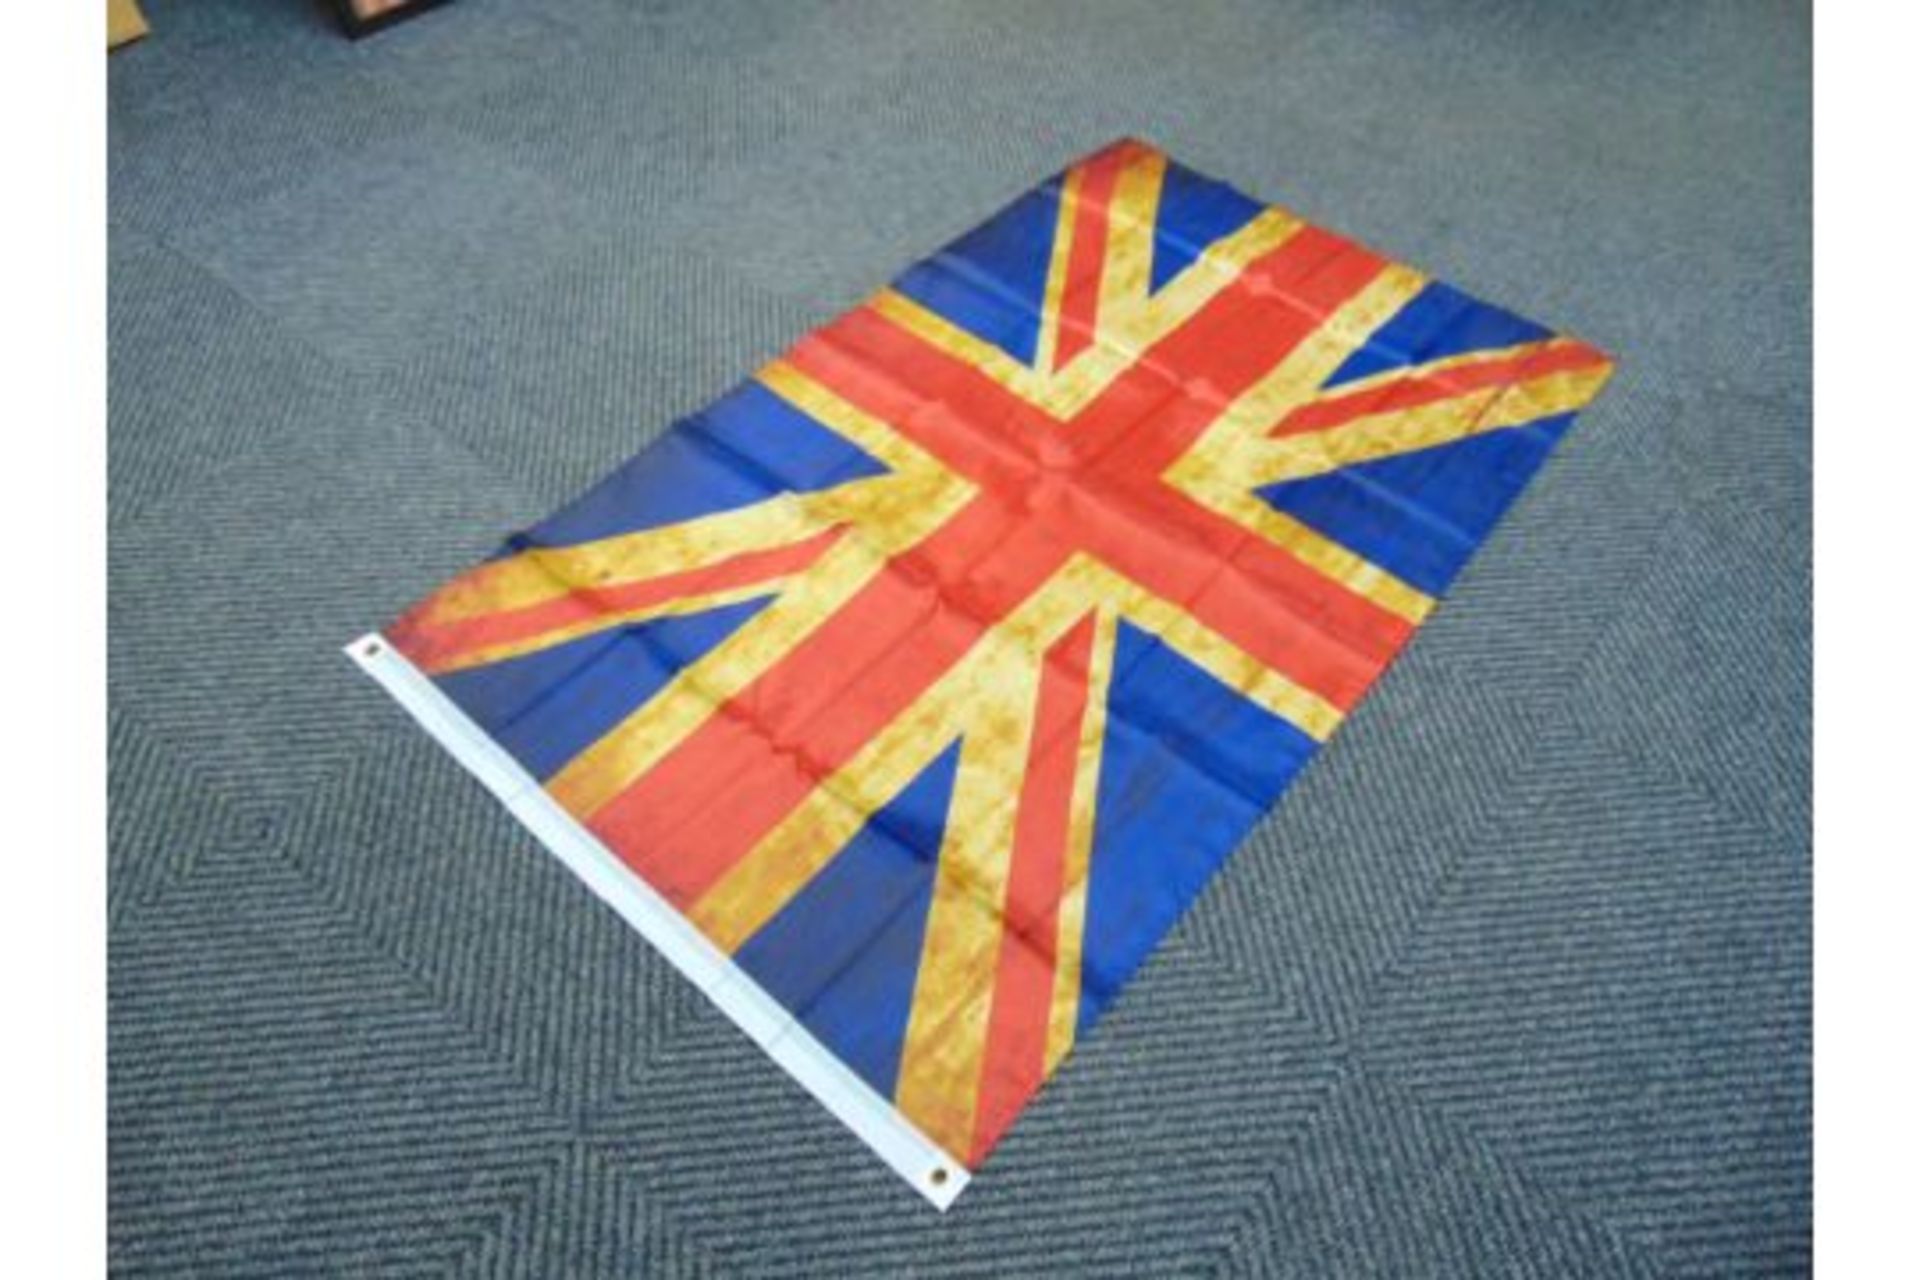 Union Jack Flag - 5ft x 3ft with Metal Eyelets. - Image 3 of 3